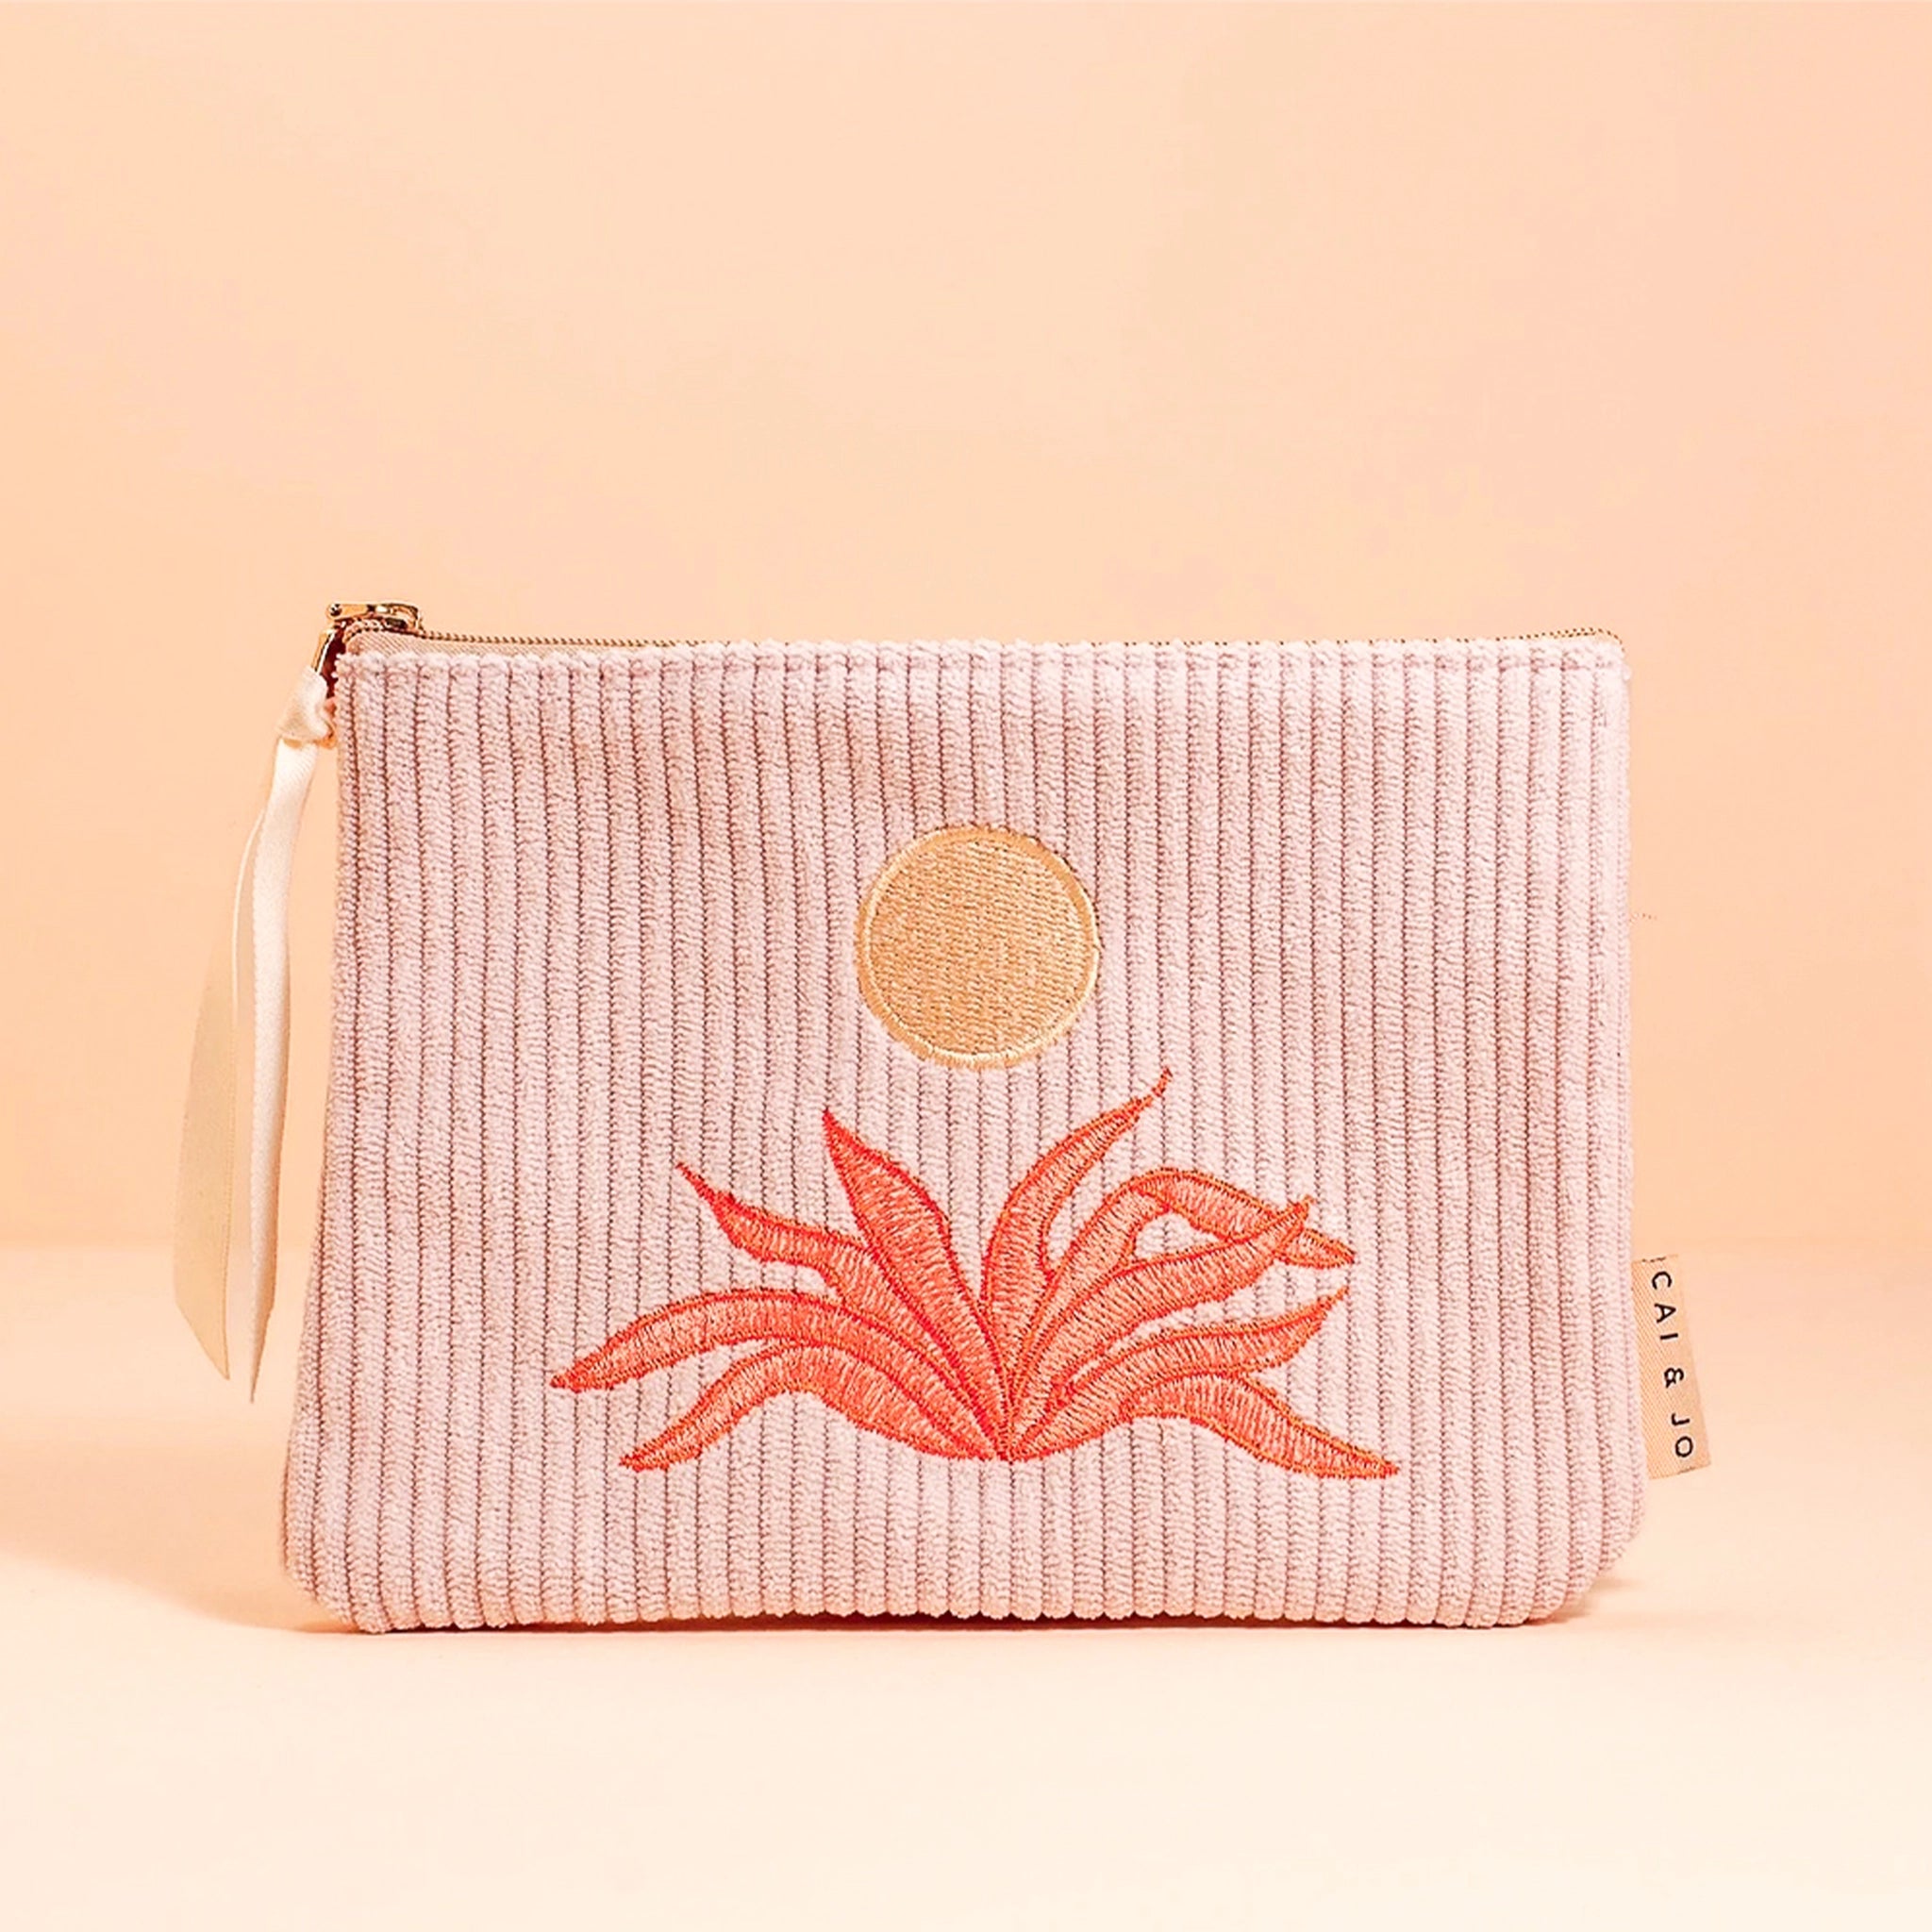 A light pink corduroy pouch with a sun and an orange aloe plant graphic in the center. The pouch has a single zipper going across the top.